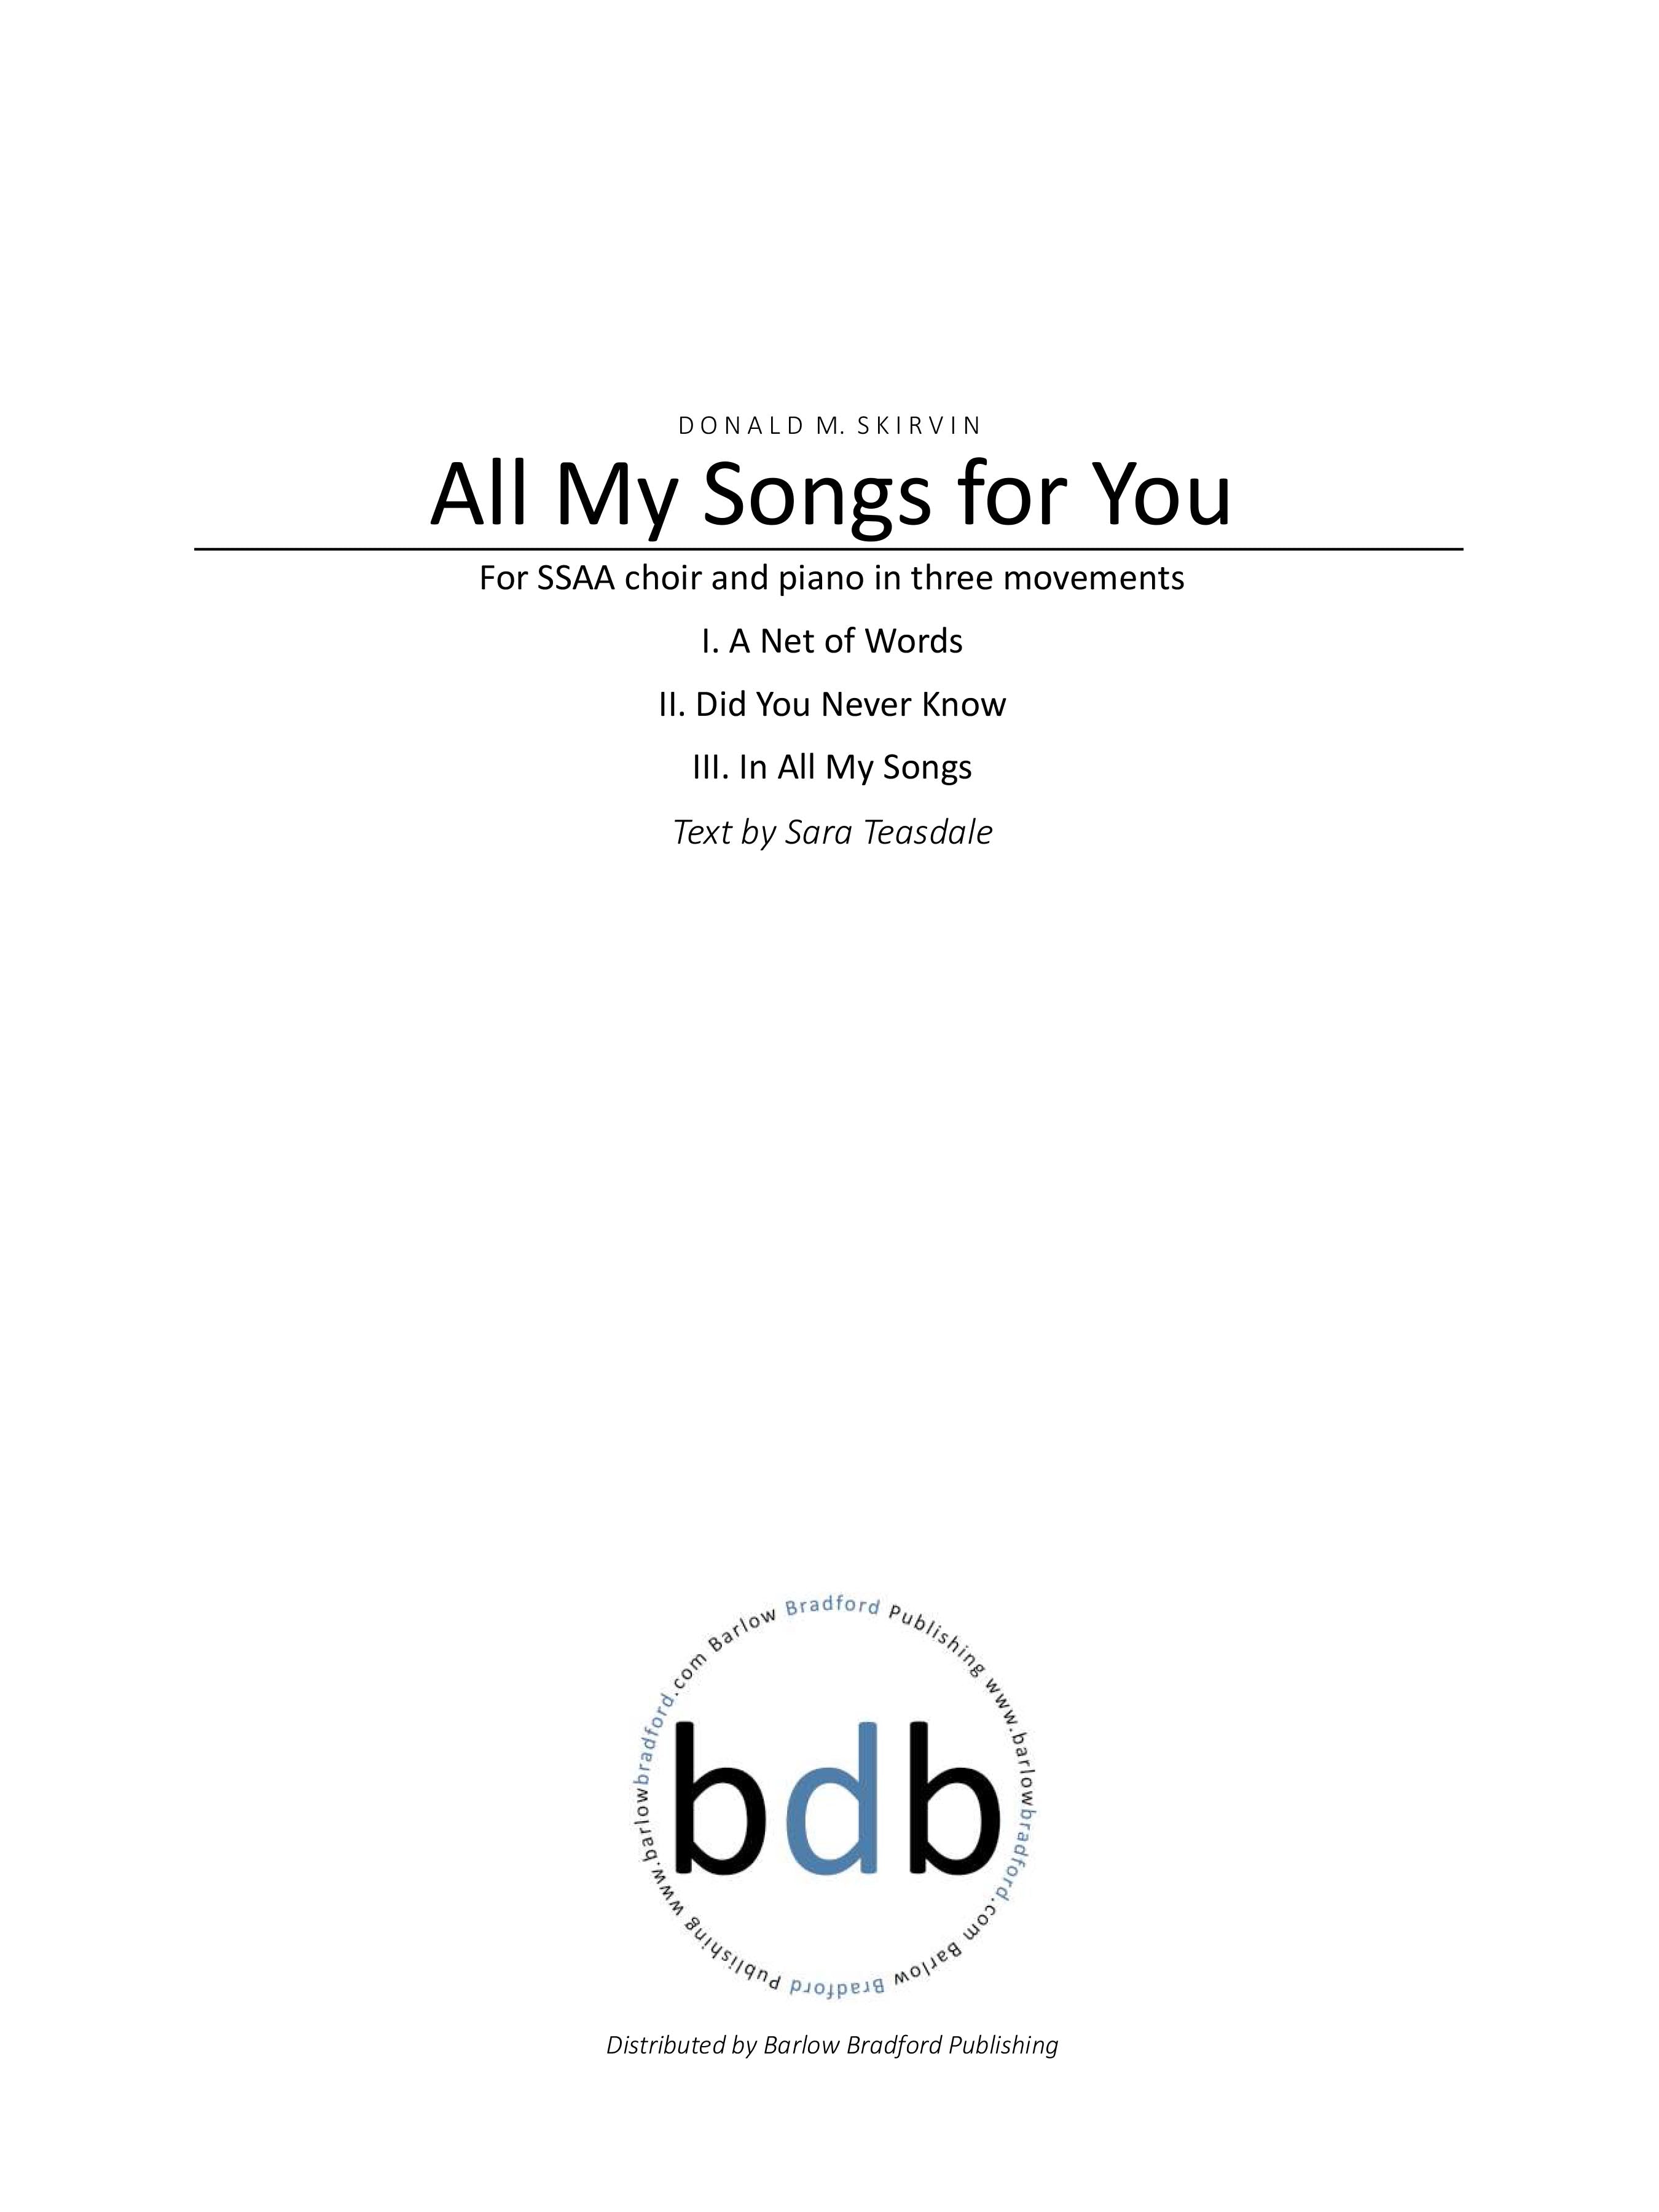 All My Songs For You